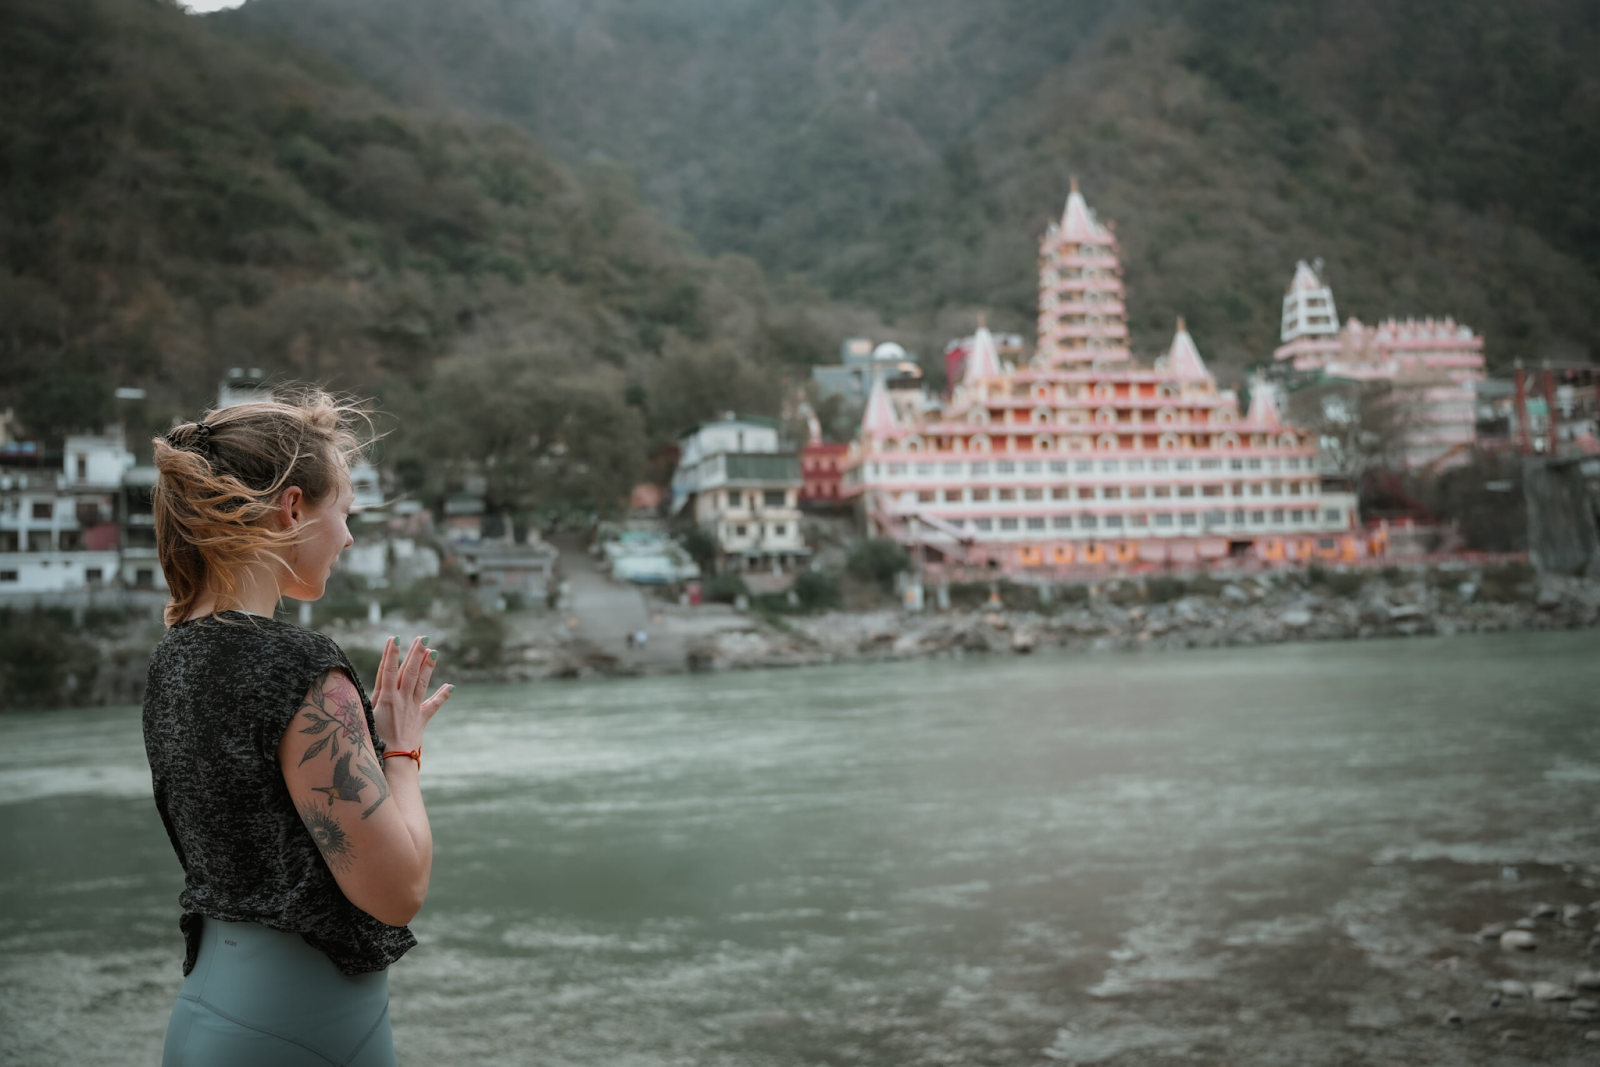 Chardham Darshan Discovering Spiritual Bliss in the Himalayas